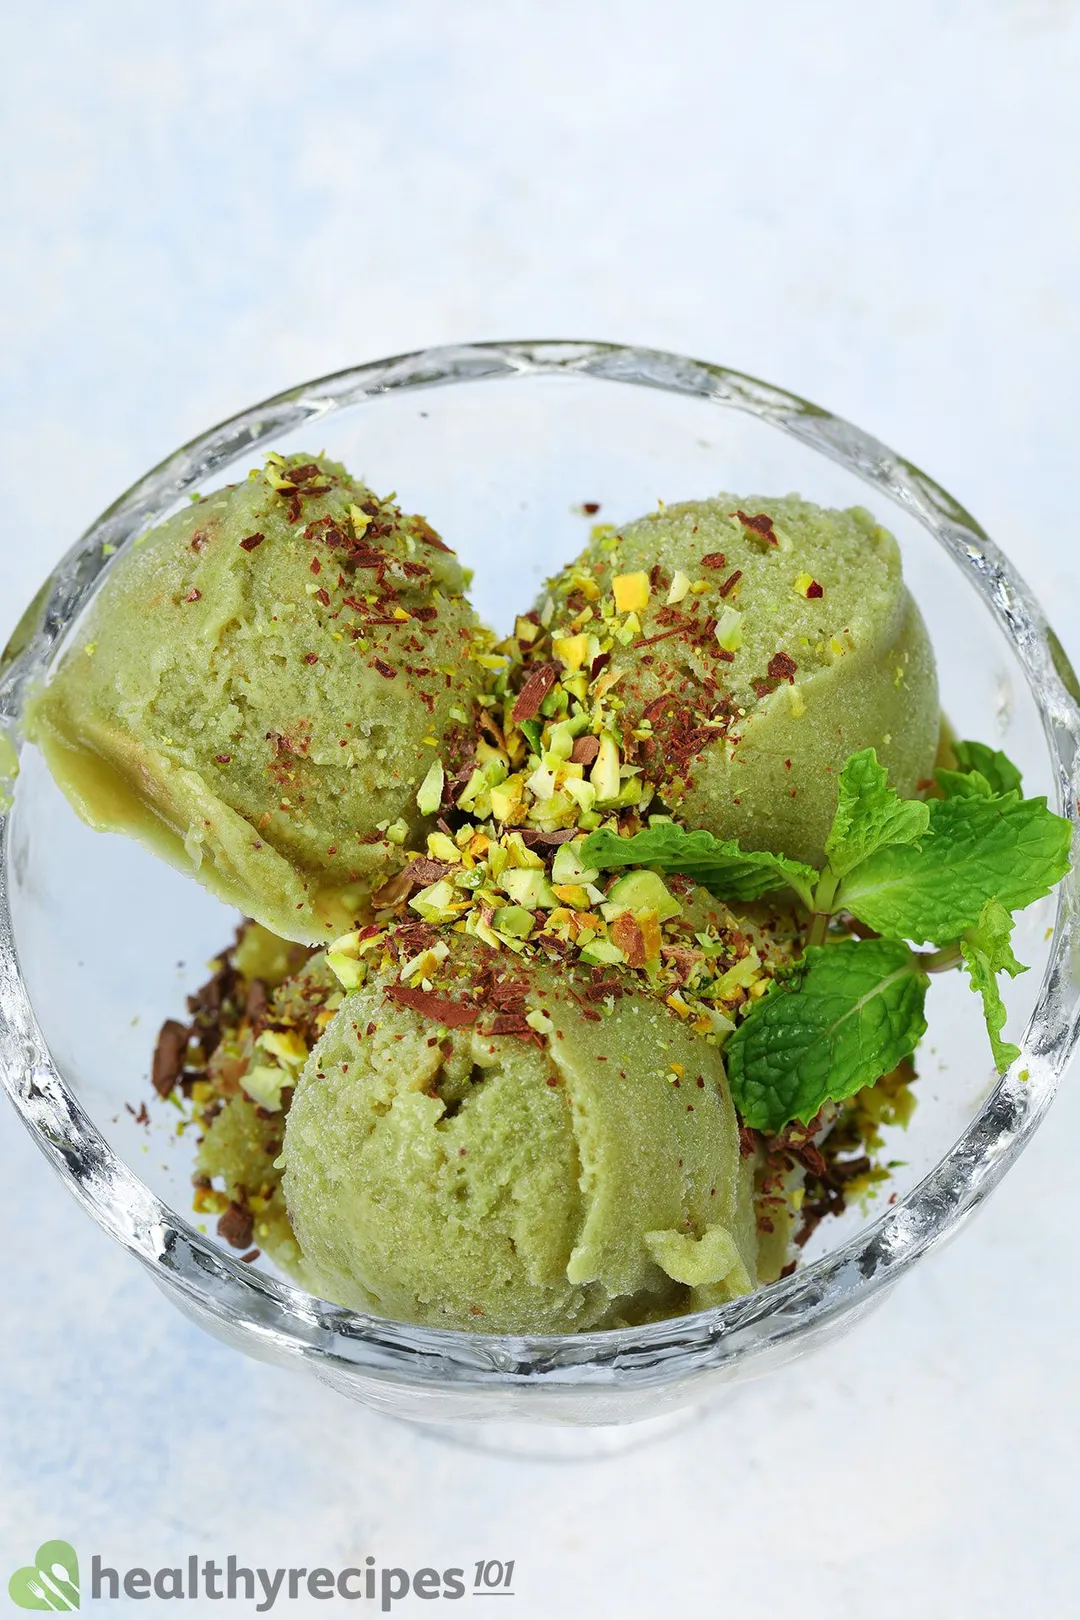 a glass bowl of avocado ice cream garnished by mint leaves